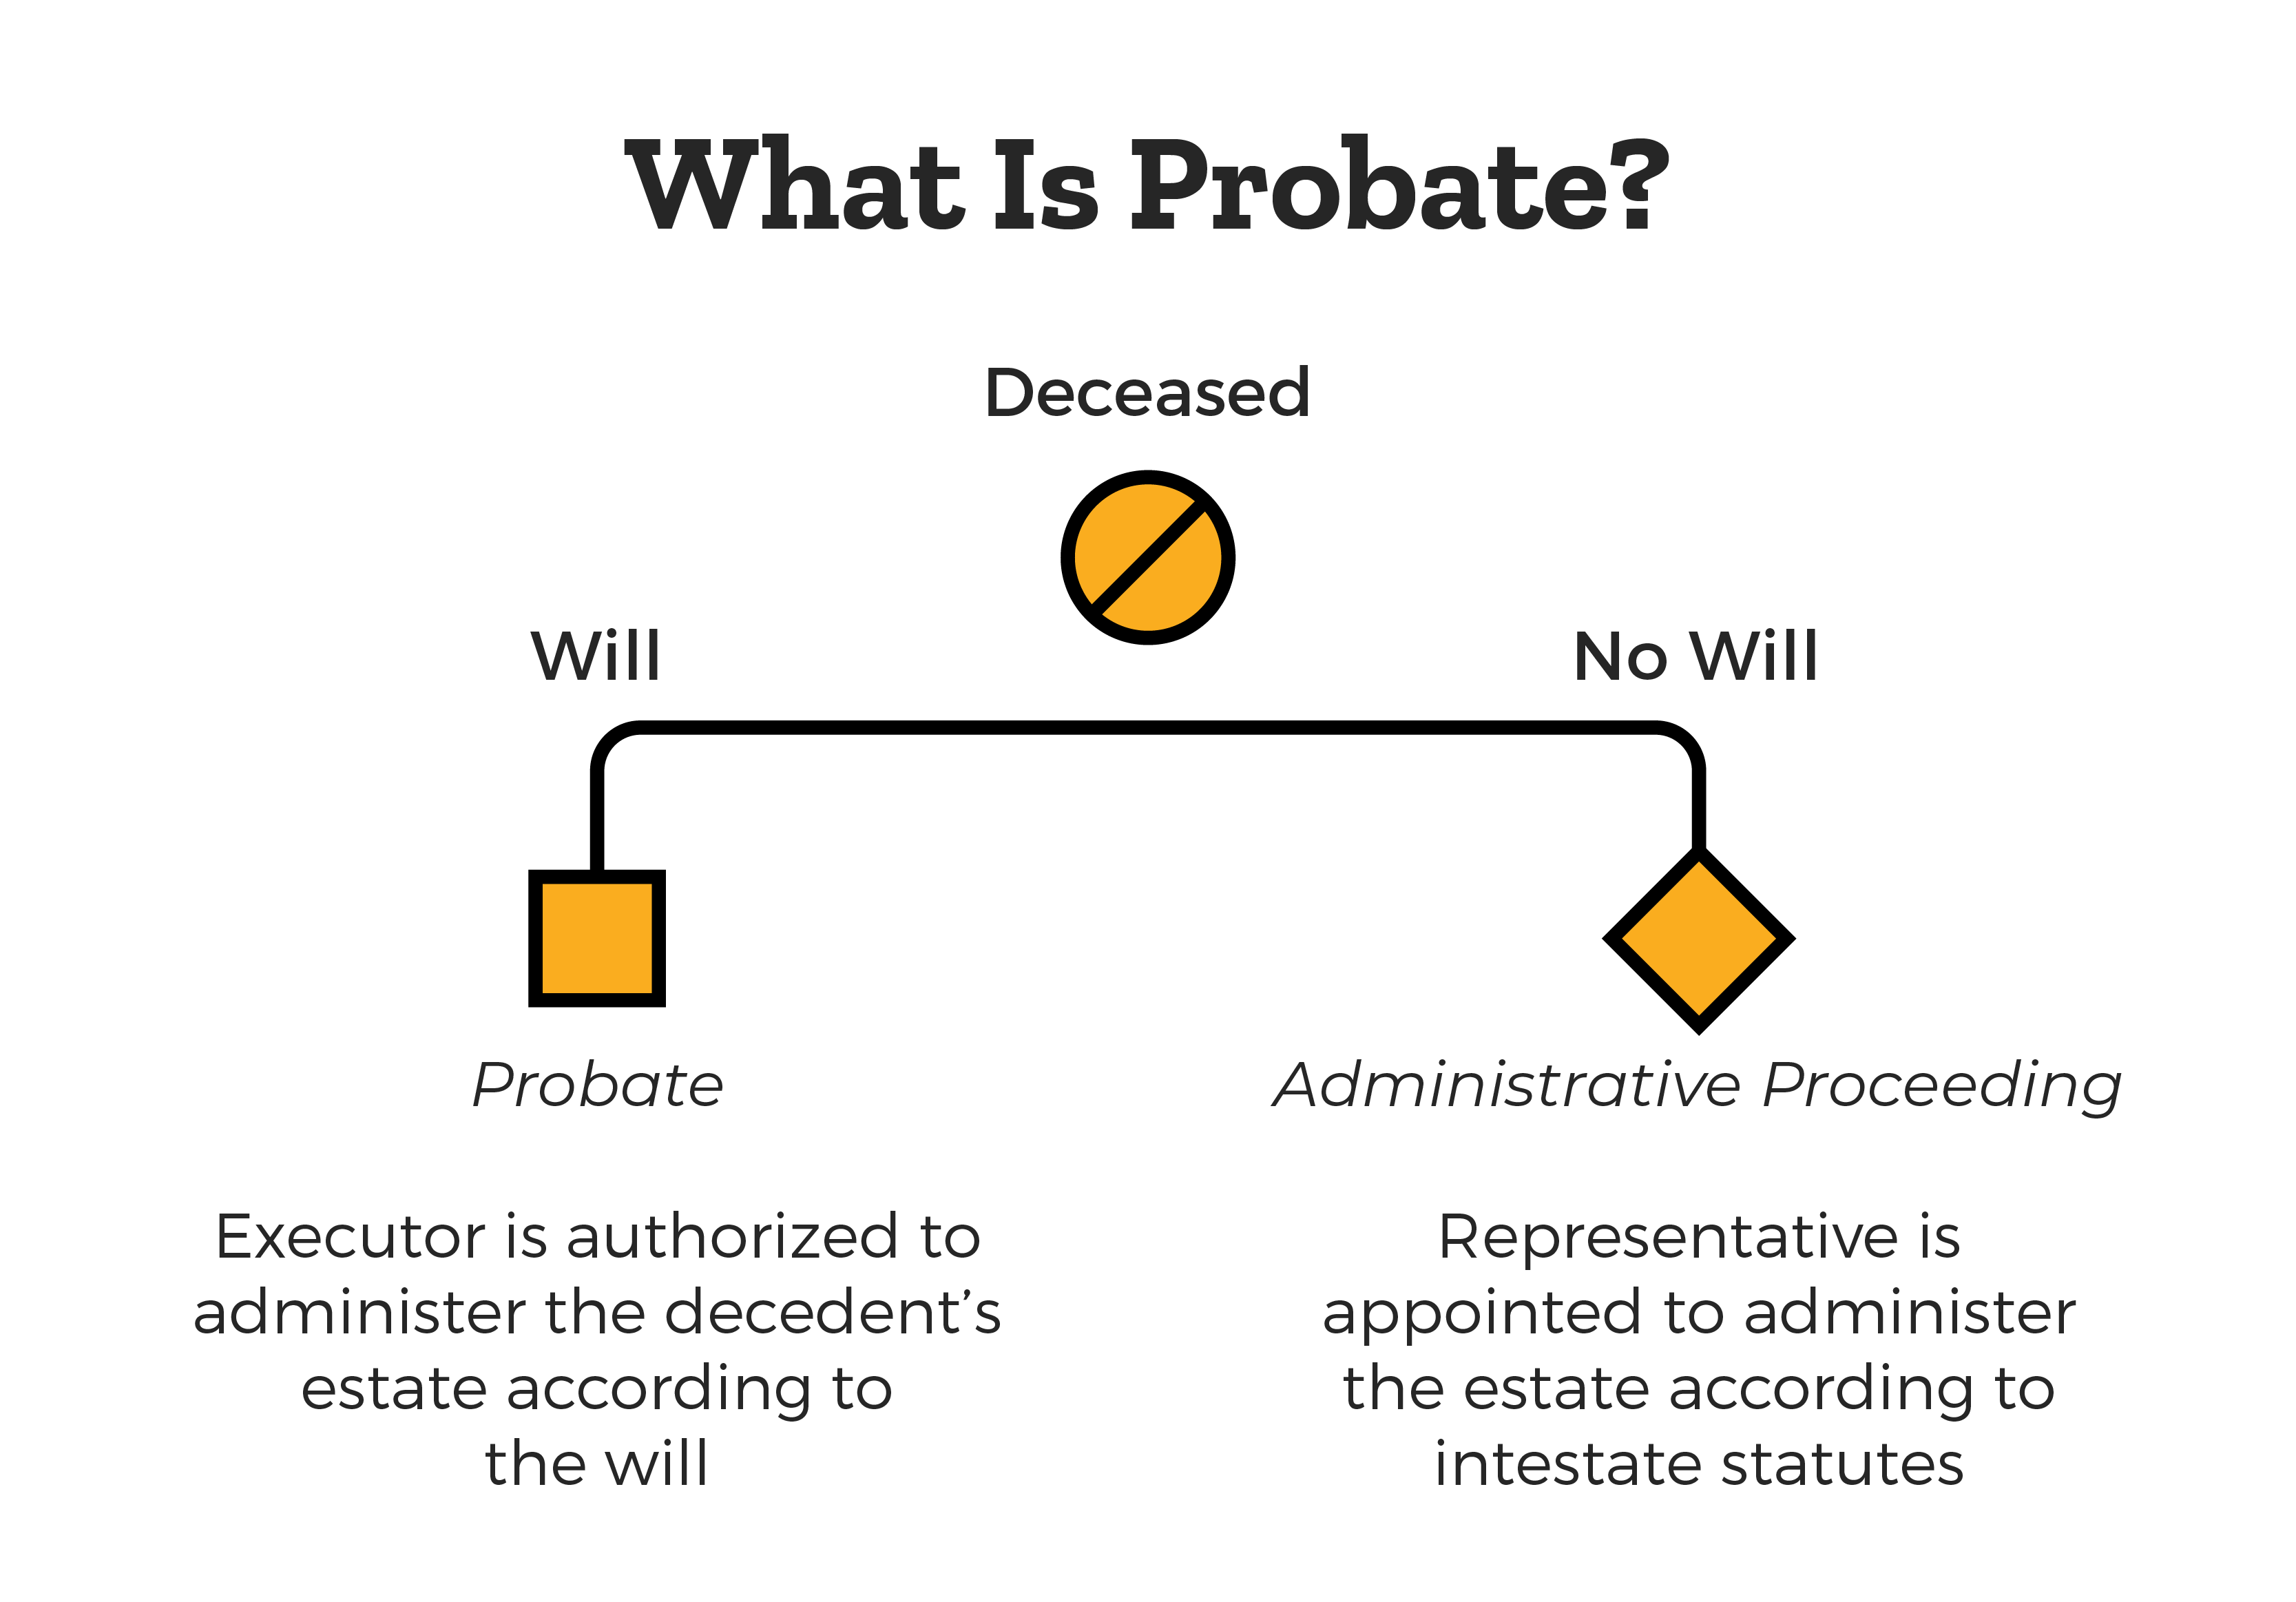 What is probate - this chart describes probate a where an executor is authorized to administer the decedent's estate according to the will. If the deceased has no will, then it is an administrative proceeding where the representative is appointed to administer the estate according to intestate statutes.